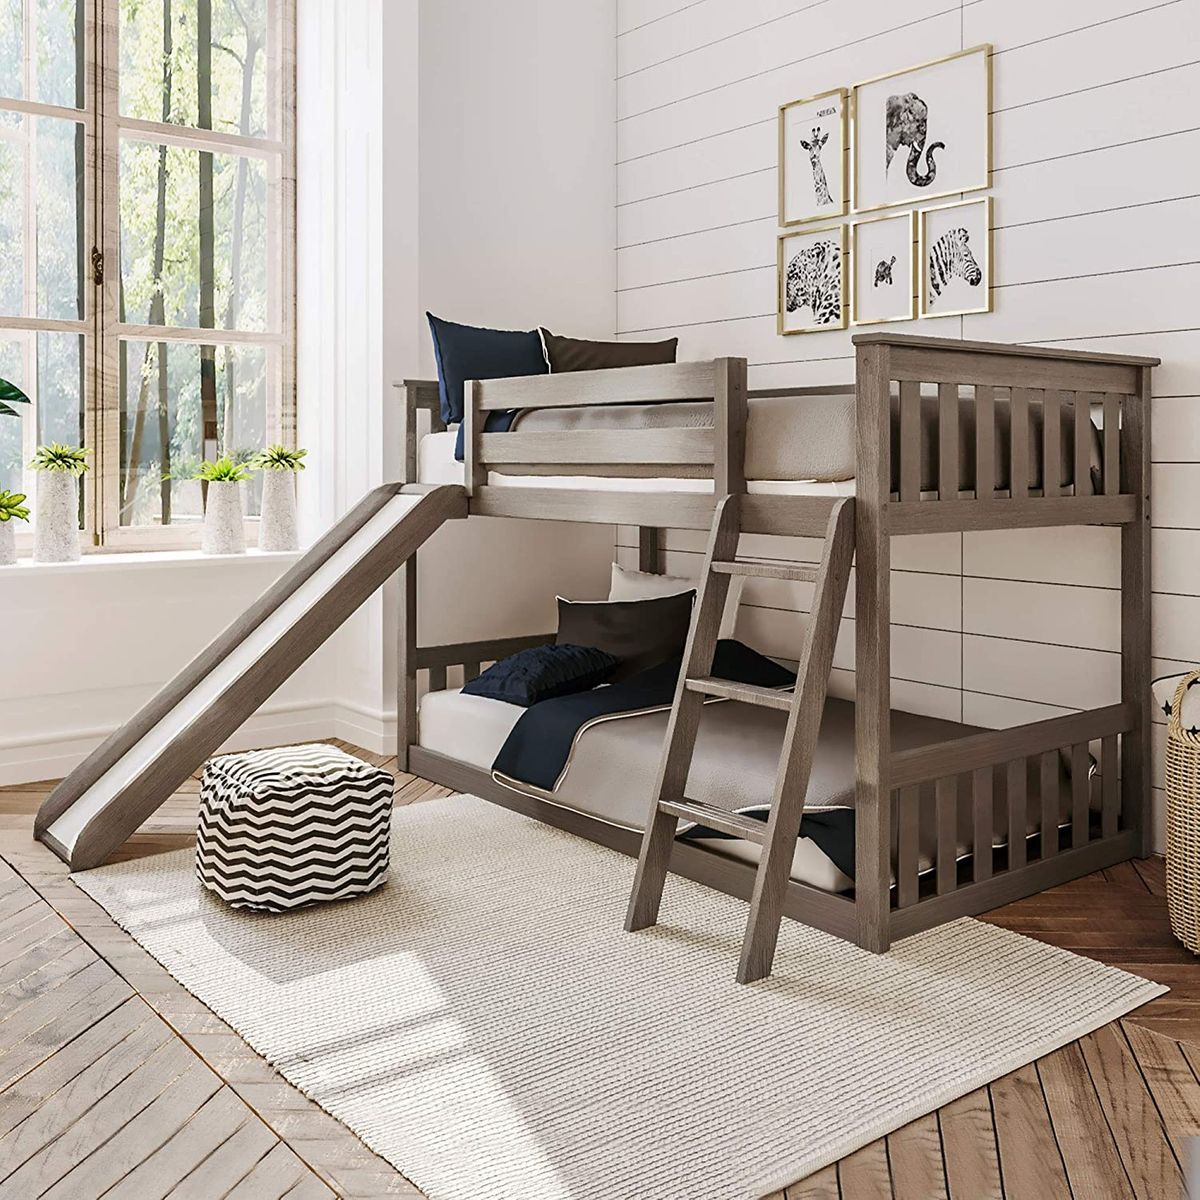 8 Best Bunk Beds 2020 The Strategist, Cot Bunk Beds For Twins